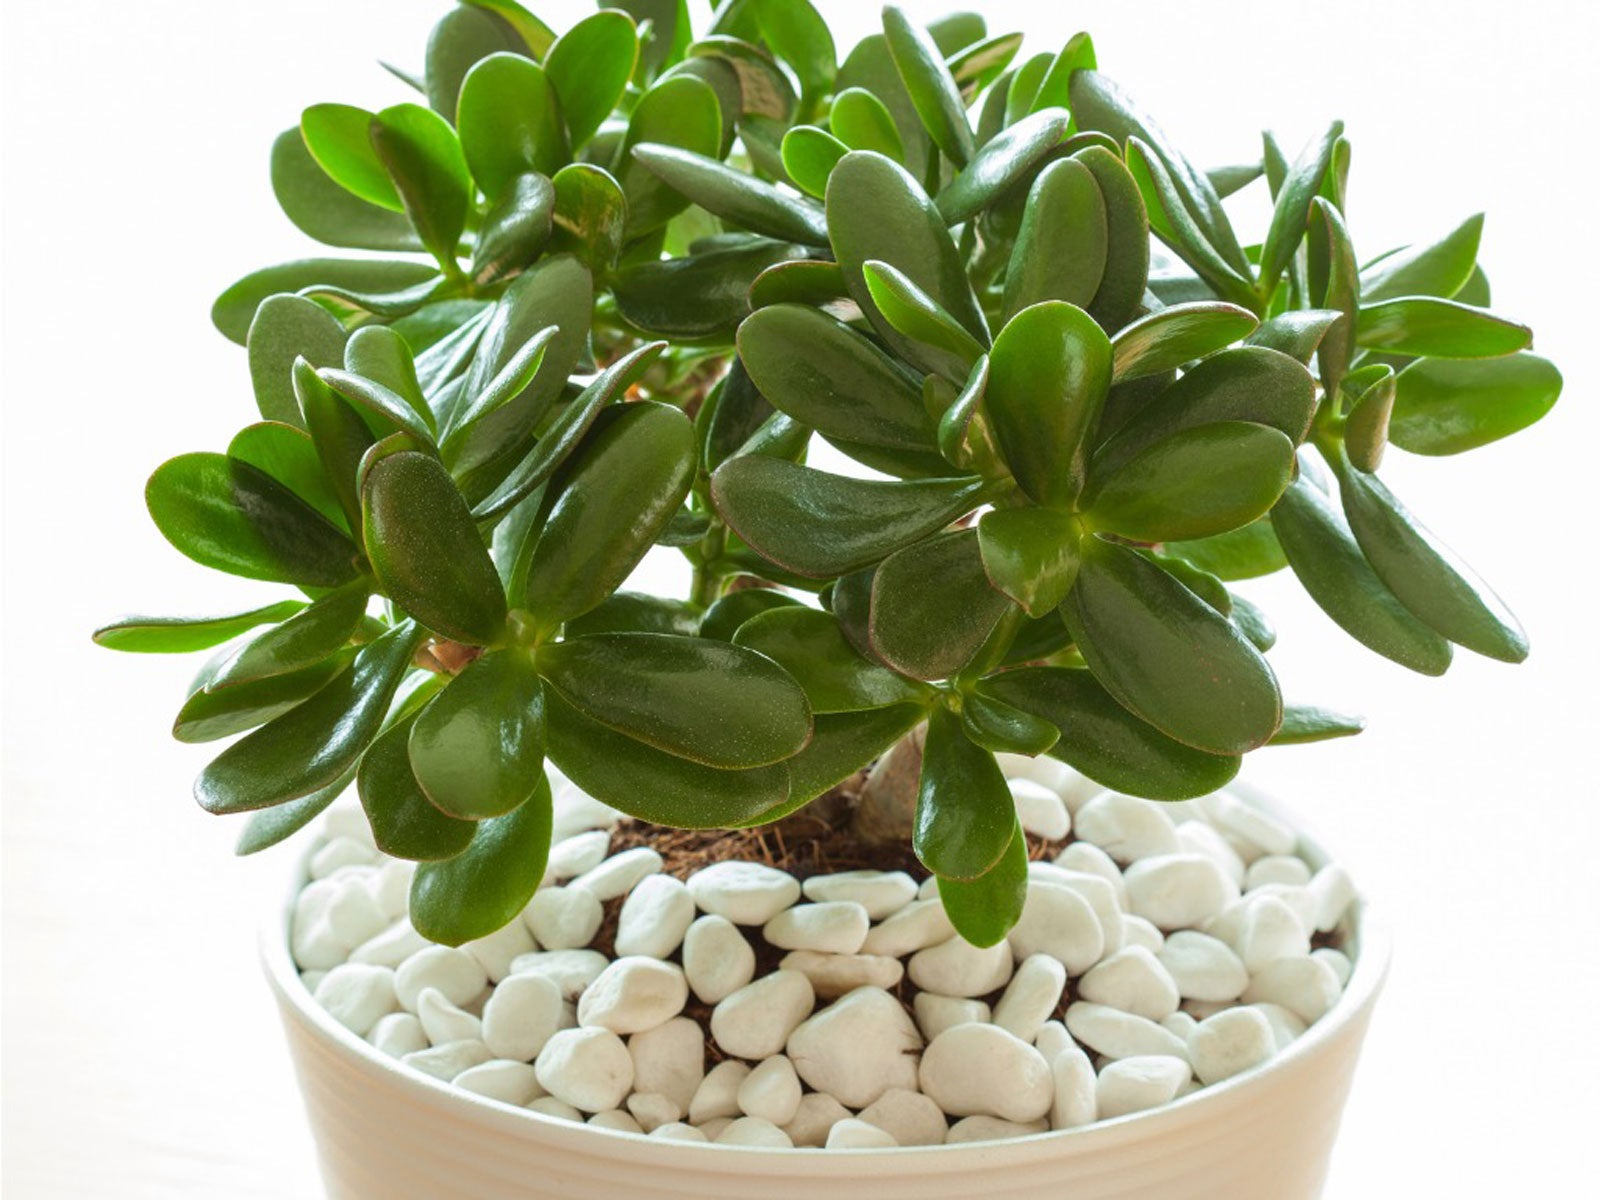 Selecting the Ideal Location for Your Jade Plant